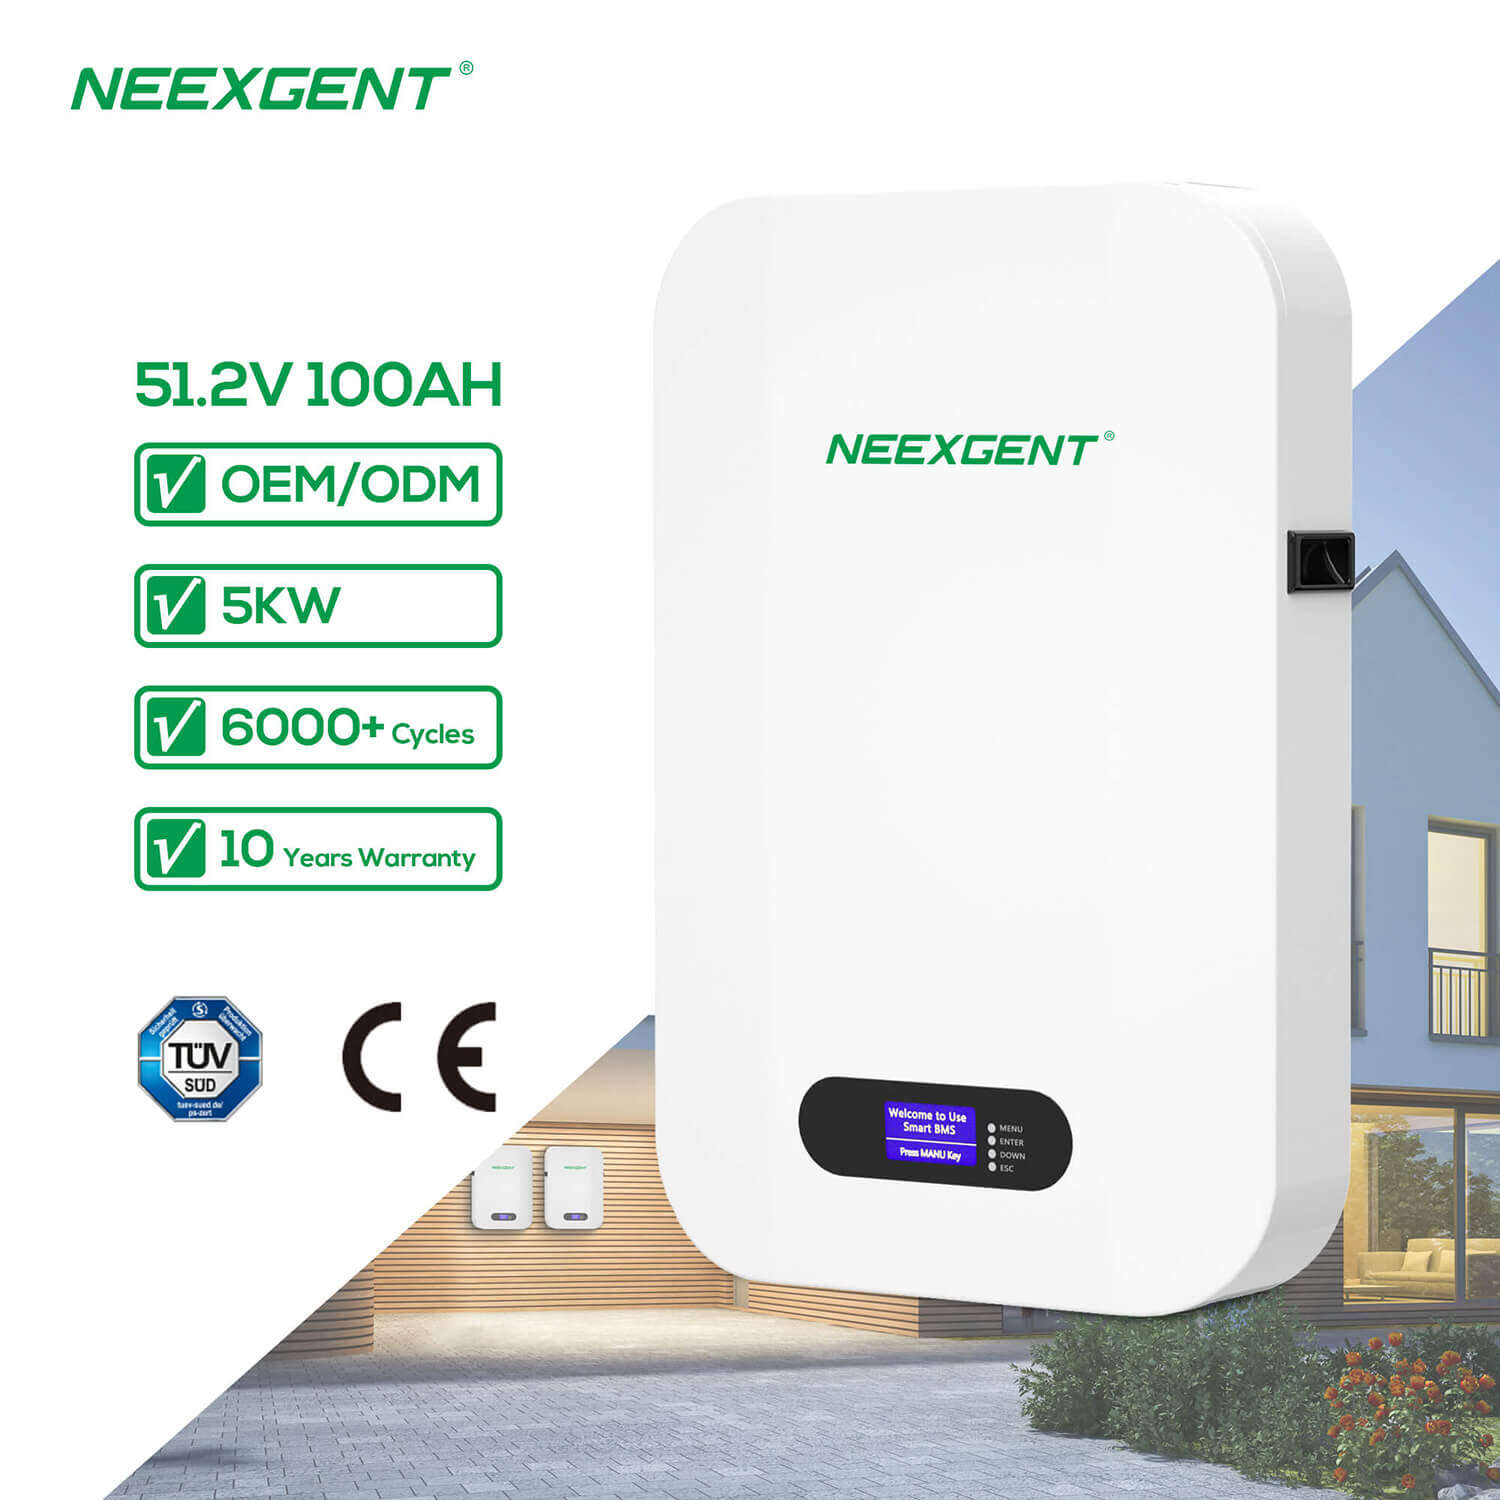 Neexgent Solar Energy 5kw Lifepo4 Battery 51.2v 100ah Power Wall Lithium Ion Rechargeable Battery